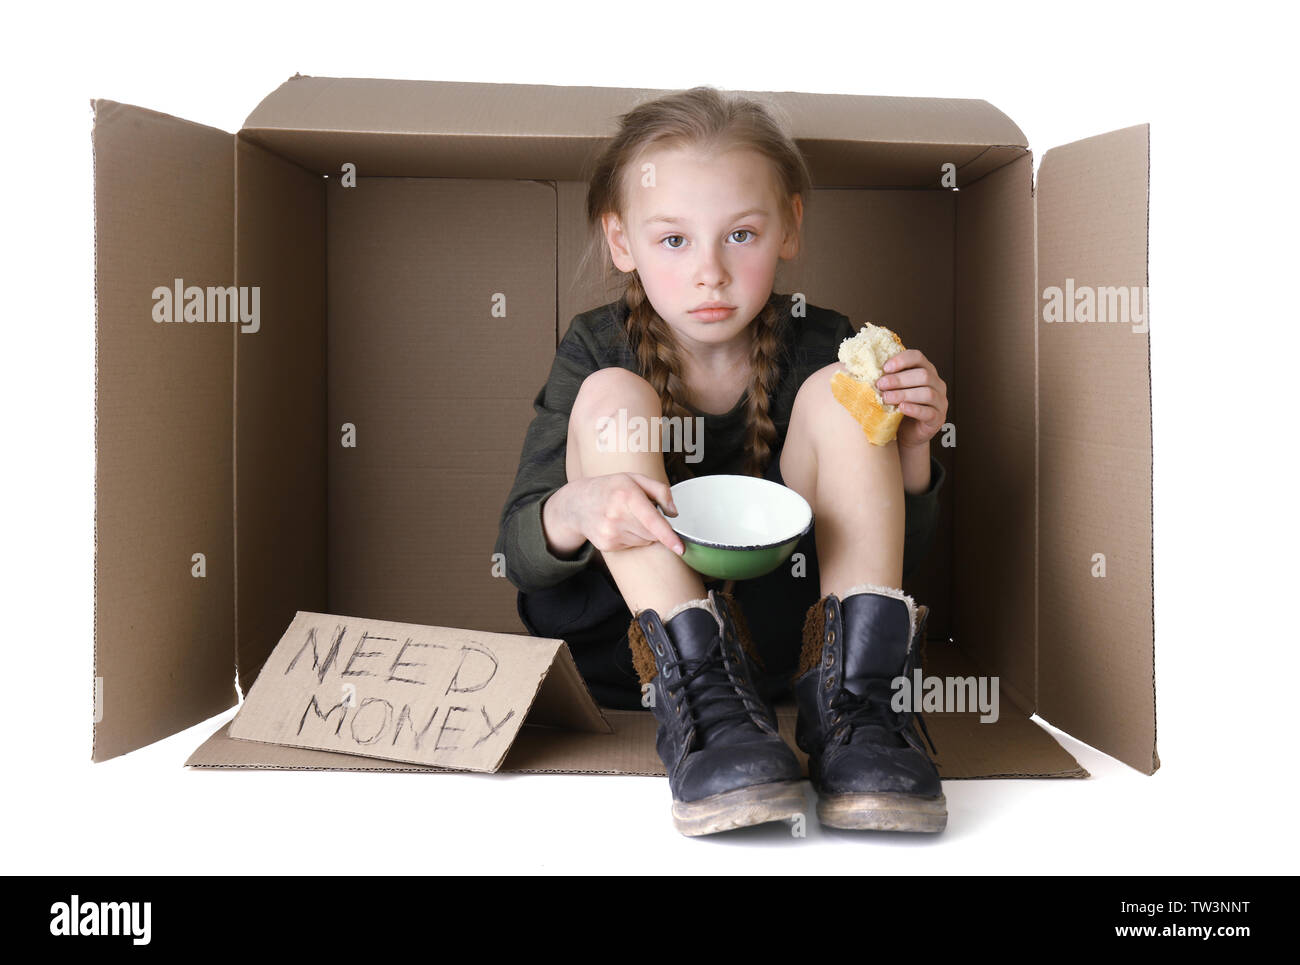 Poor little girl sitting in cardboard box and begging for money on white background Stock Photo